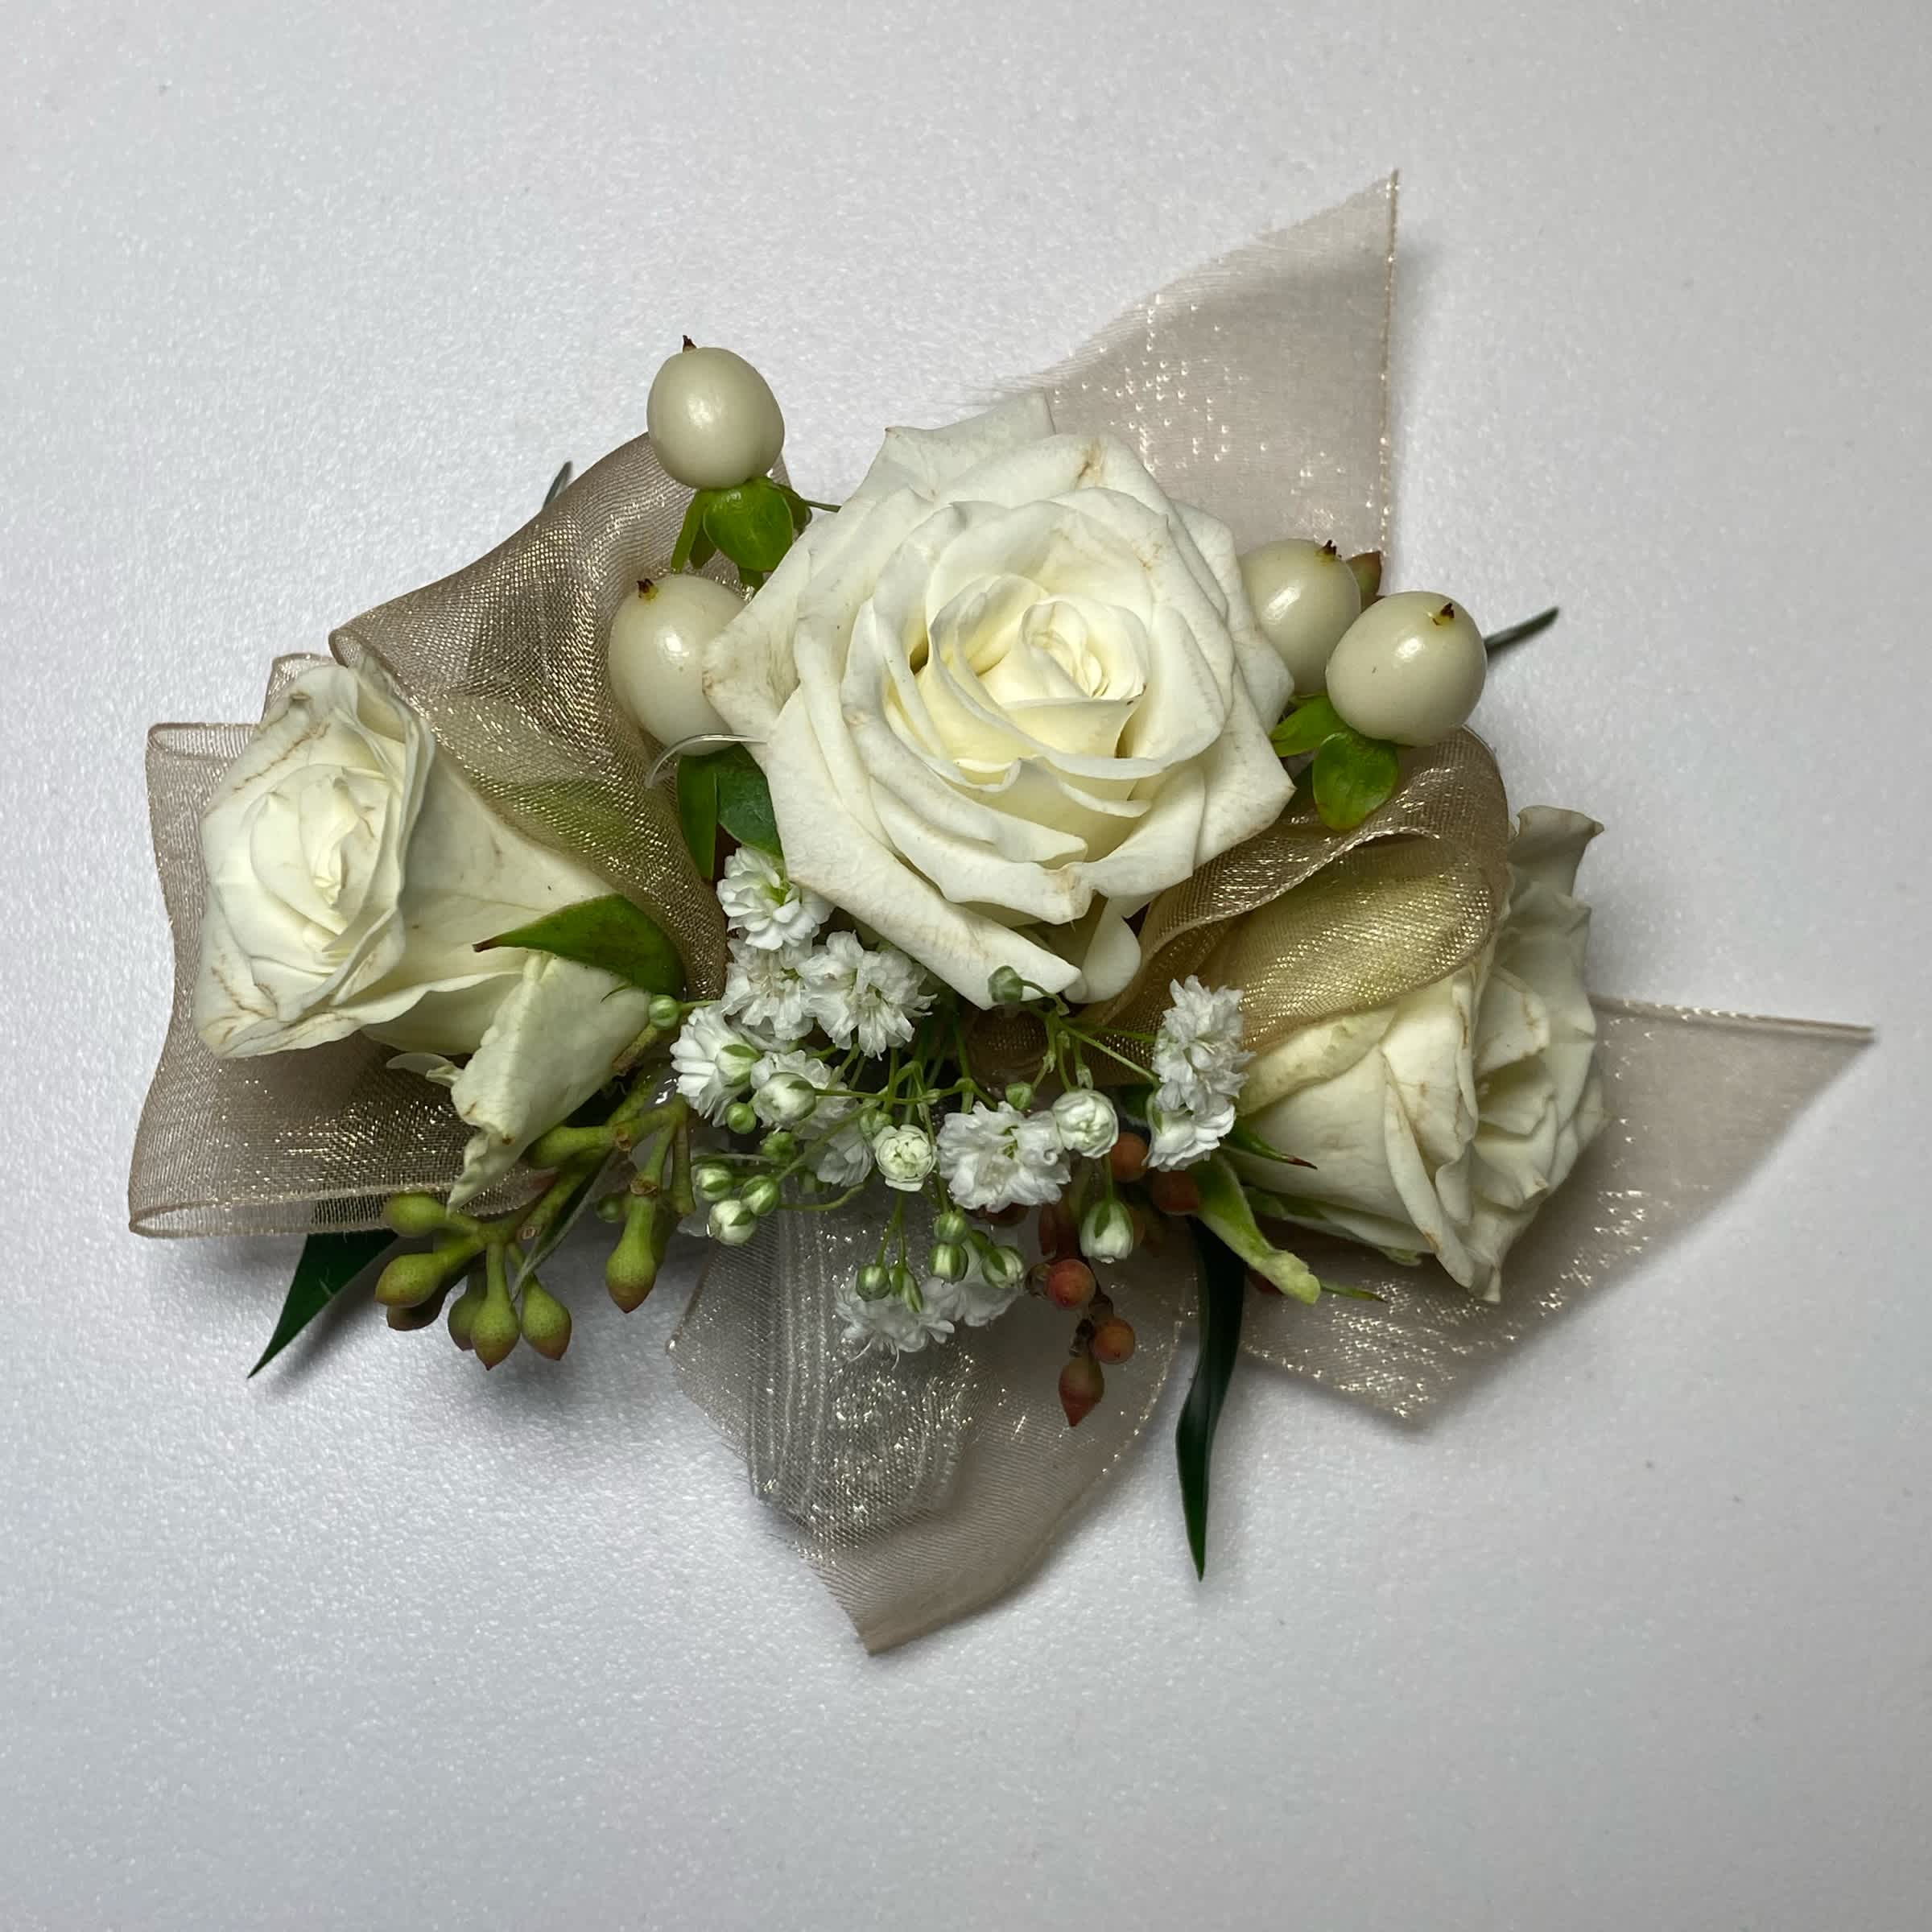 Gold/ White Rose Wrist Corsage - Prom/Wedding - This White Rose Corsage Includes an Adult Size Elastic Wristband, Gold Chiffon Ribbon, White Spray Roses, Hypericum Berries, Gentle Greenery and Seeded Eucalyptus. Or as Similar as Possible.